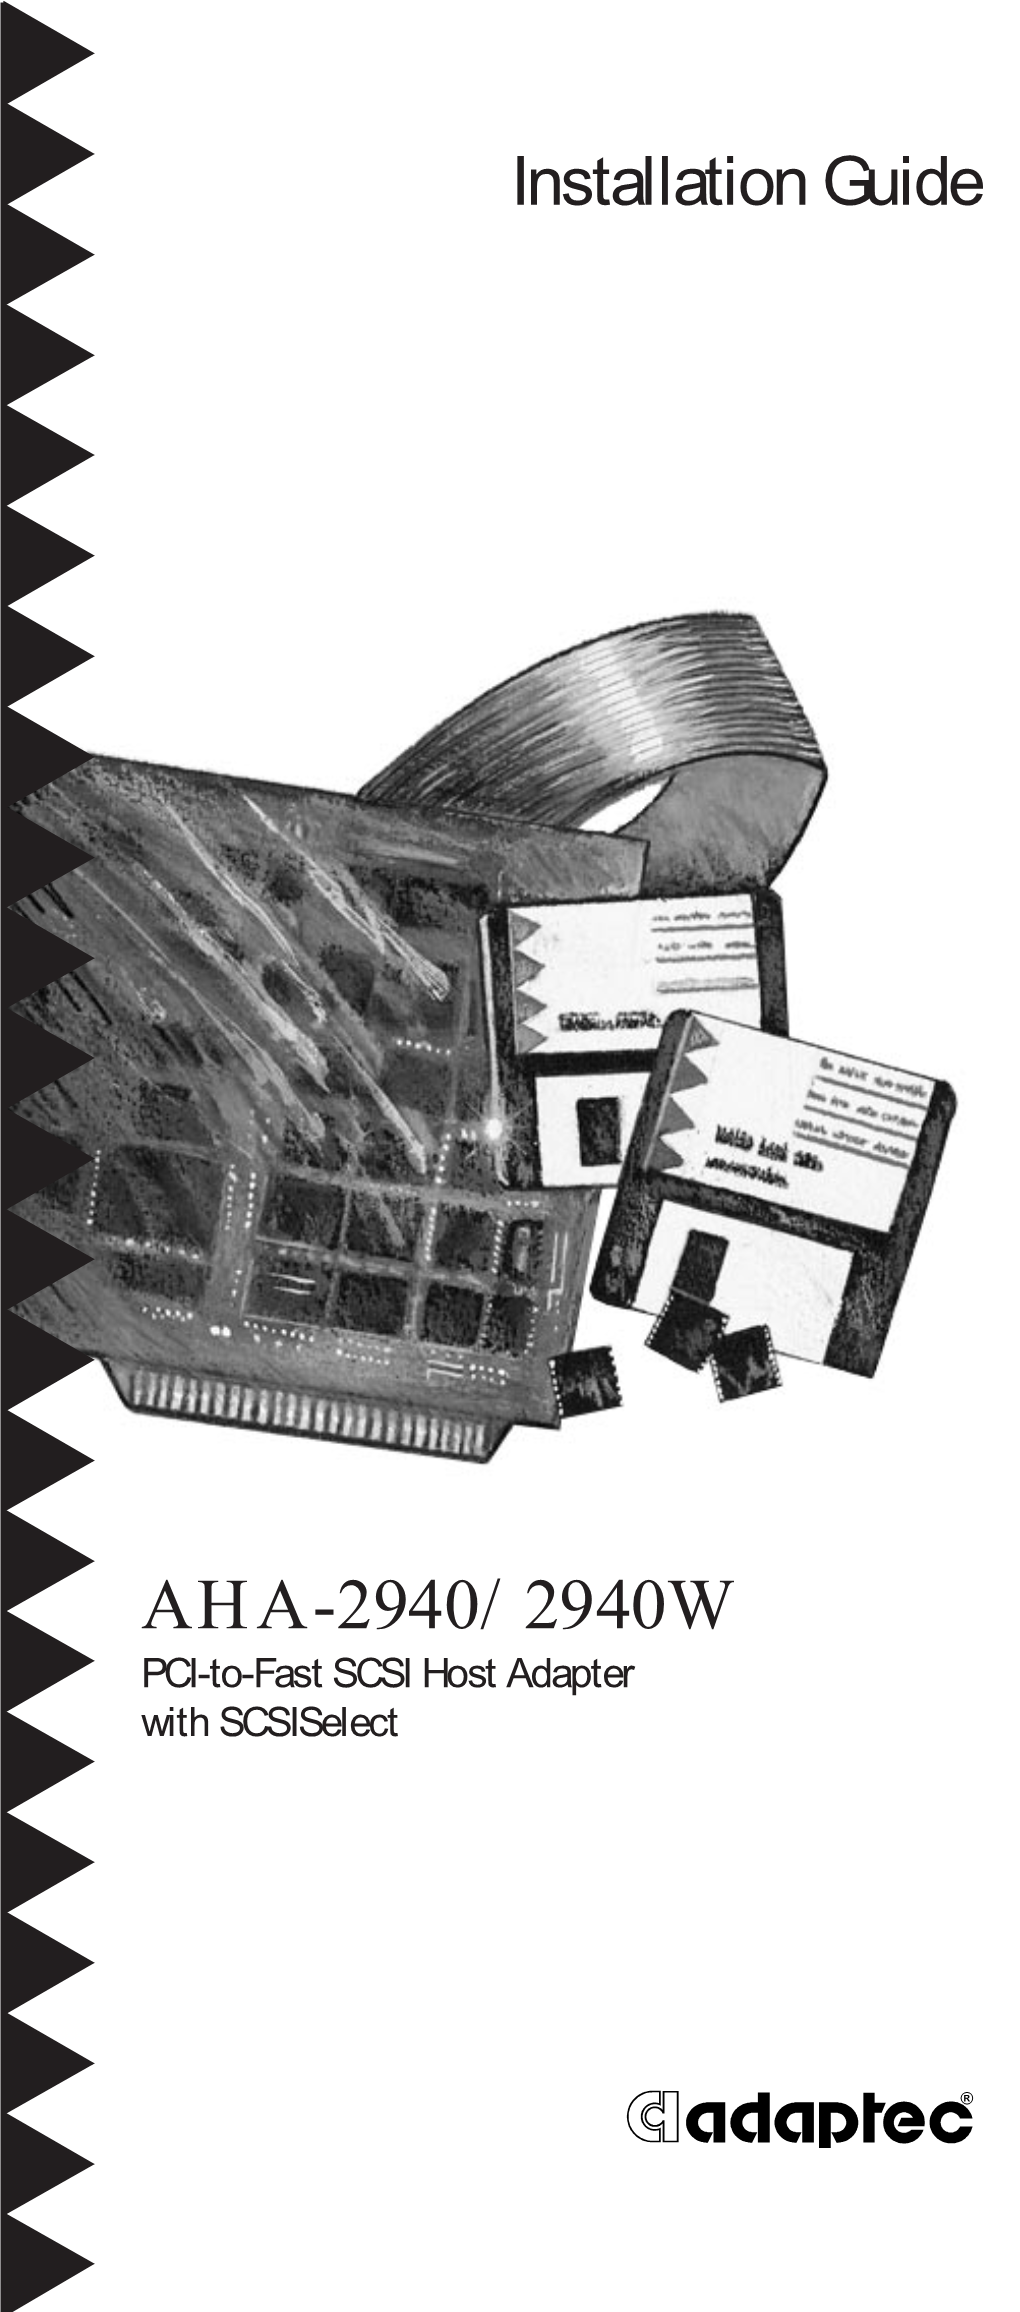 Install Guide for the AHA-2940/2940W